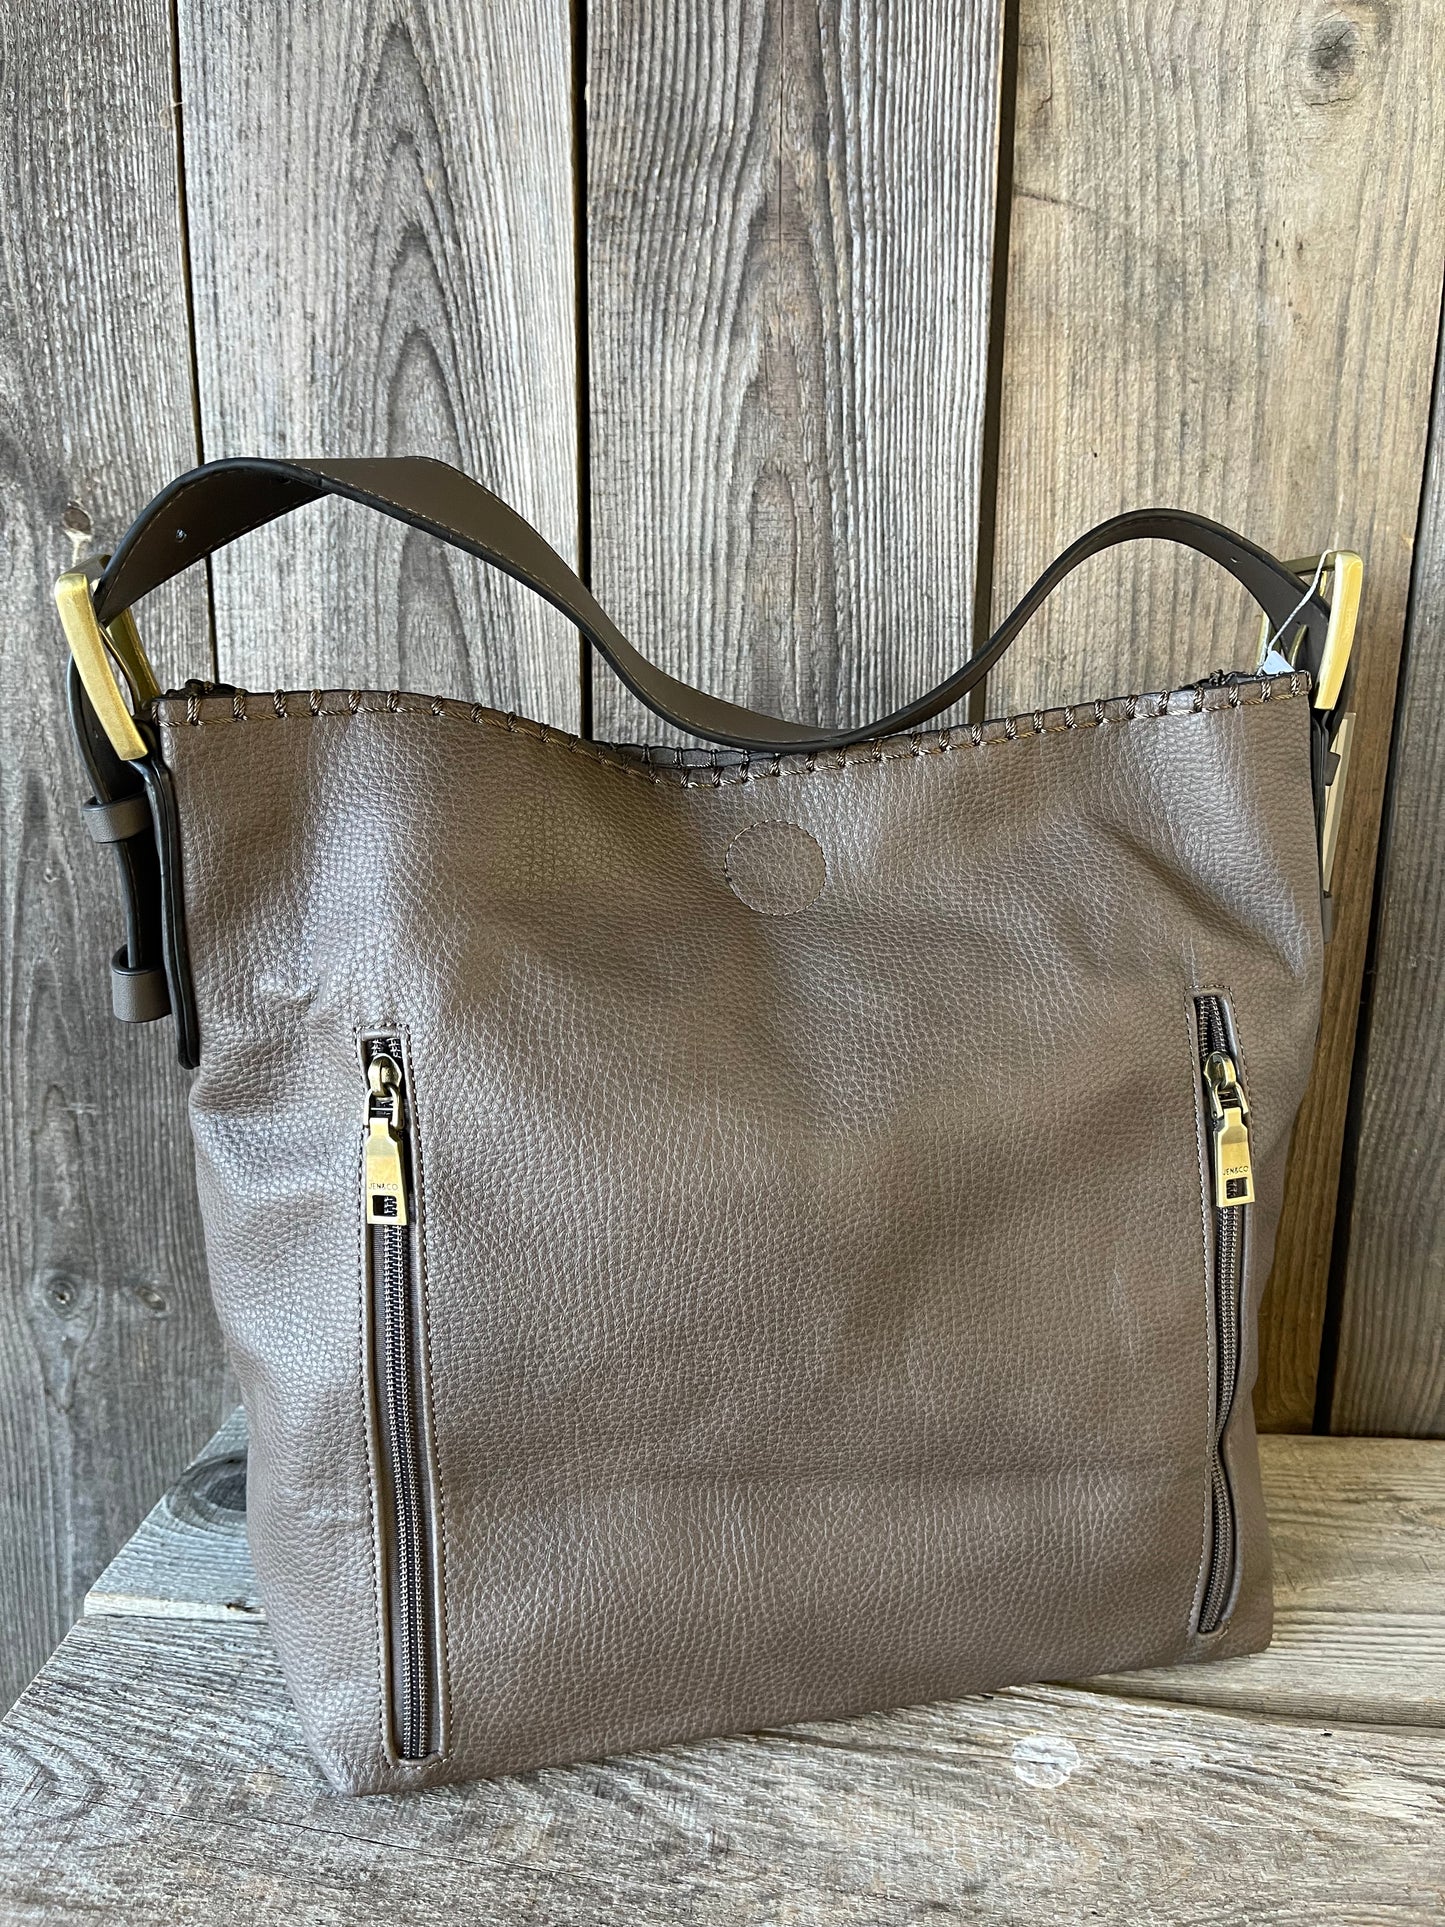 Alexia 2 in 1 Conceal Carry Hobo Bag - Chocolate